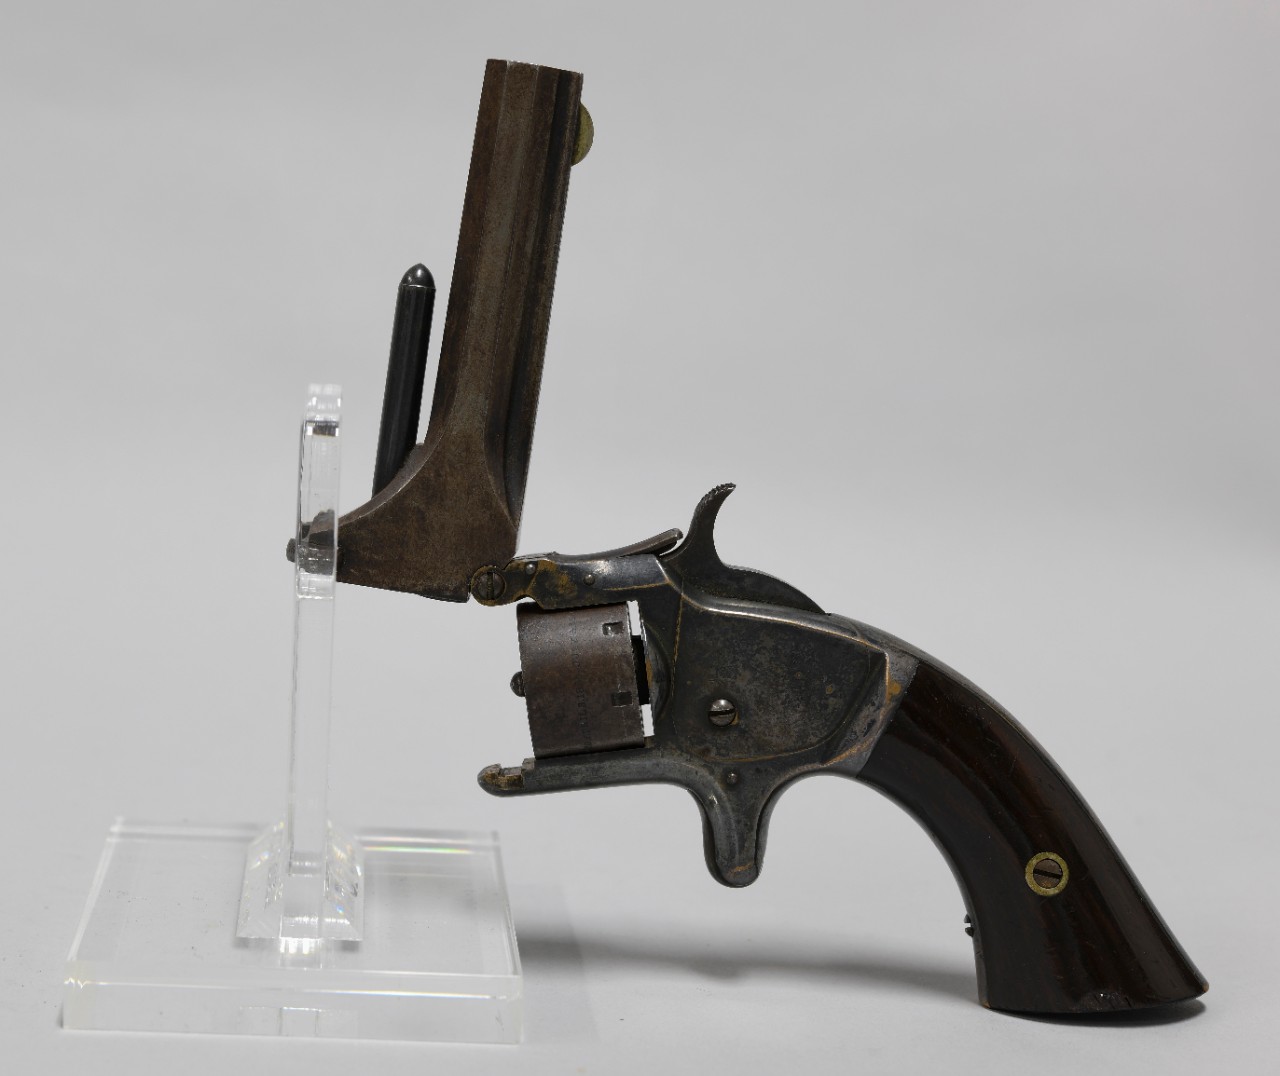 Reverse view of .22 caliber Model No. 1 Smith & Wesson bottom-break revolver. Metal frame with polished wood grip. Barrel opened.    